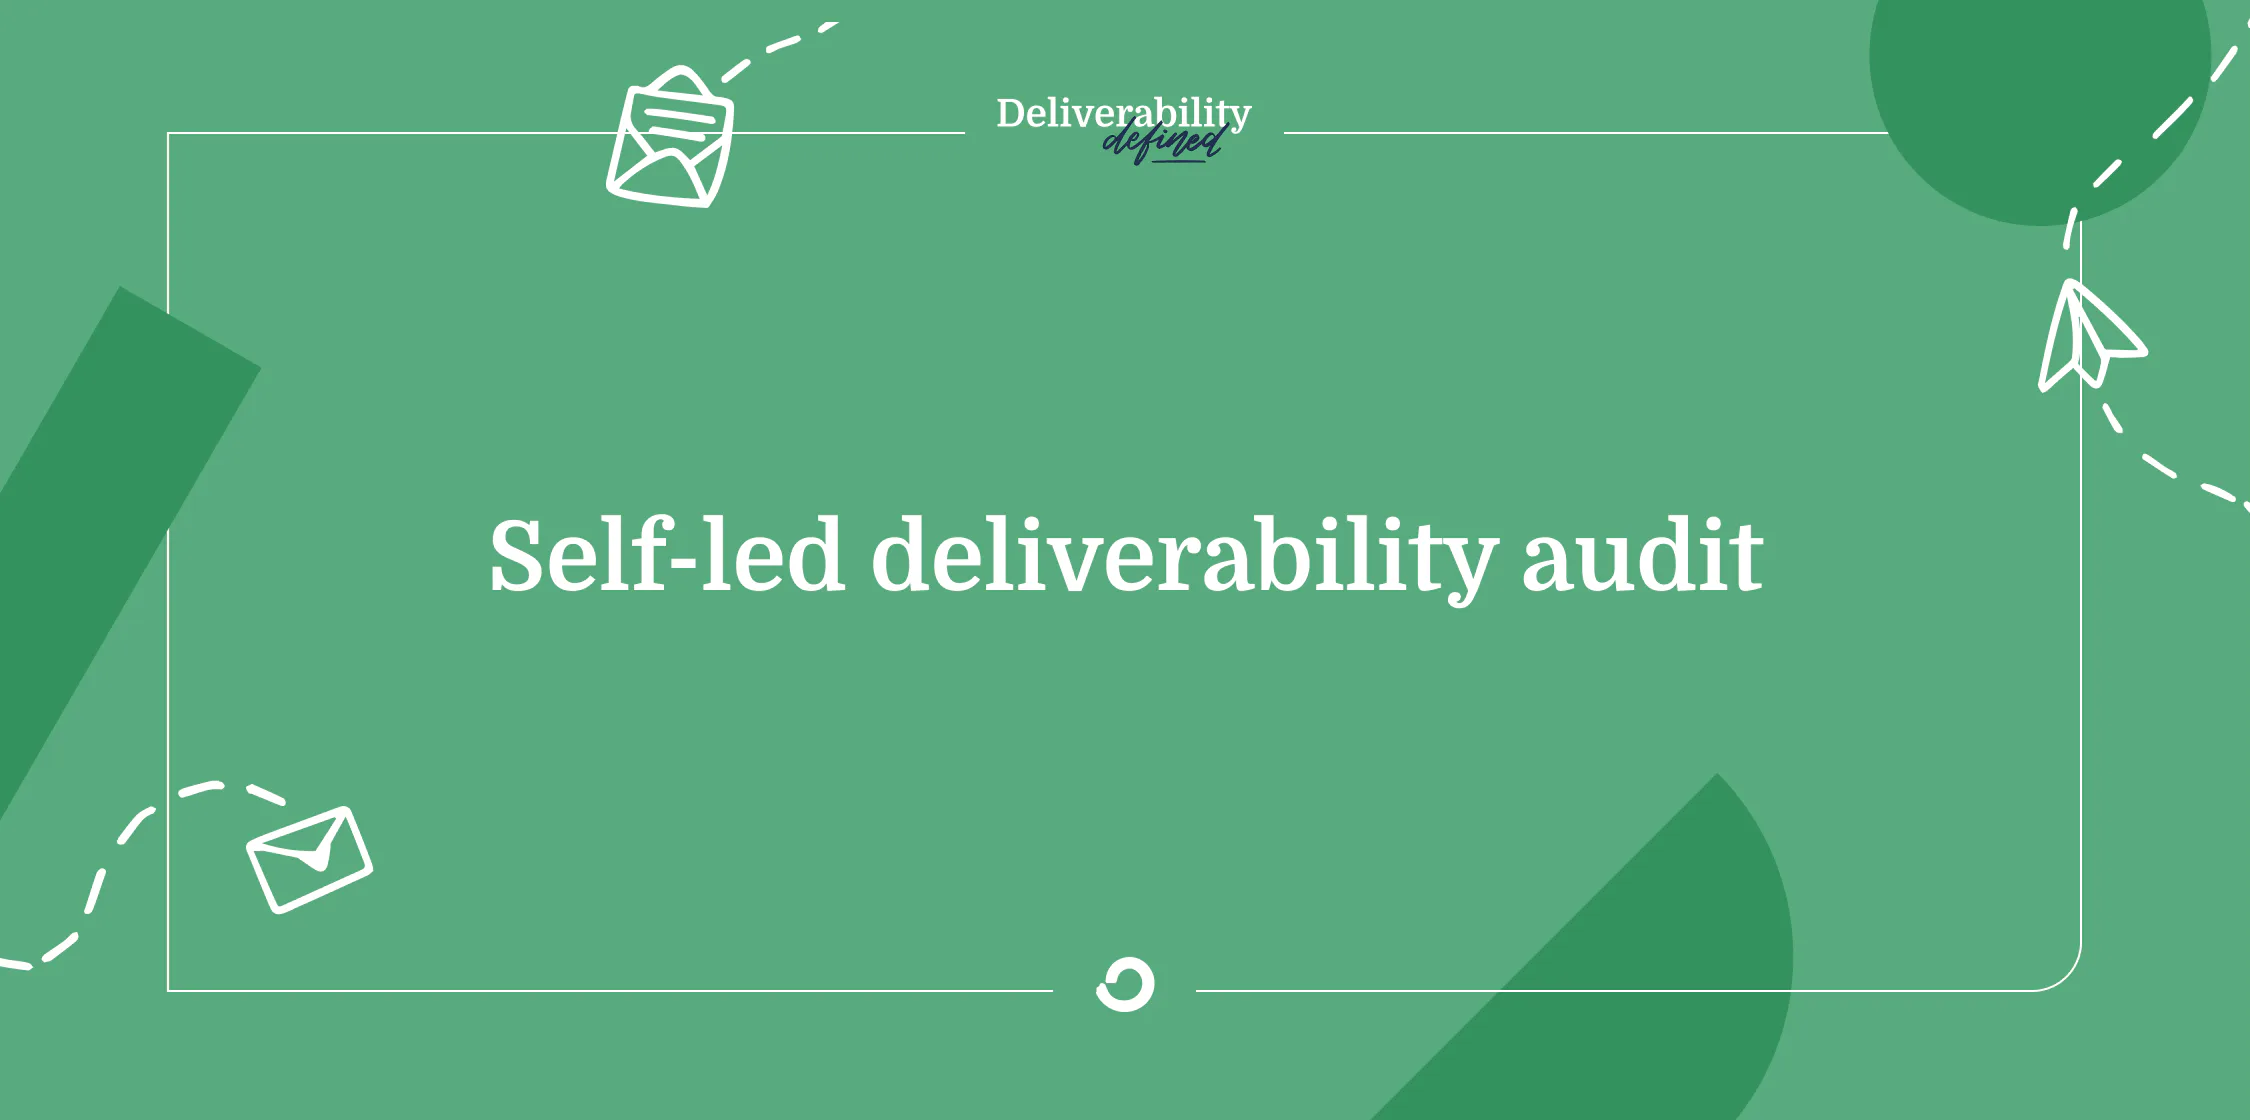 How to perform a self-led deliverability audit